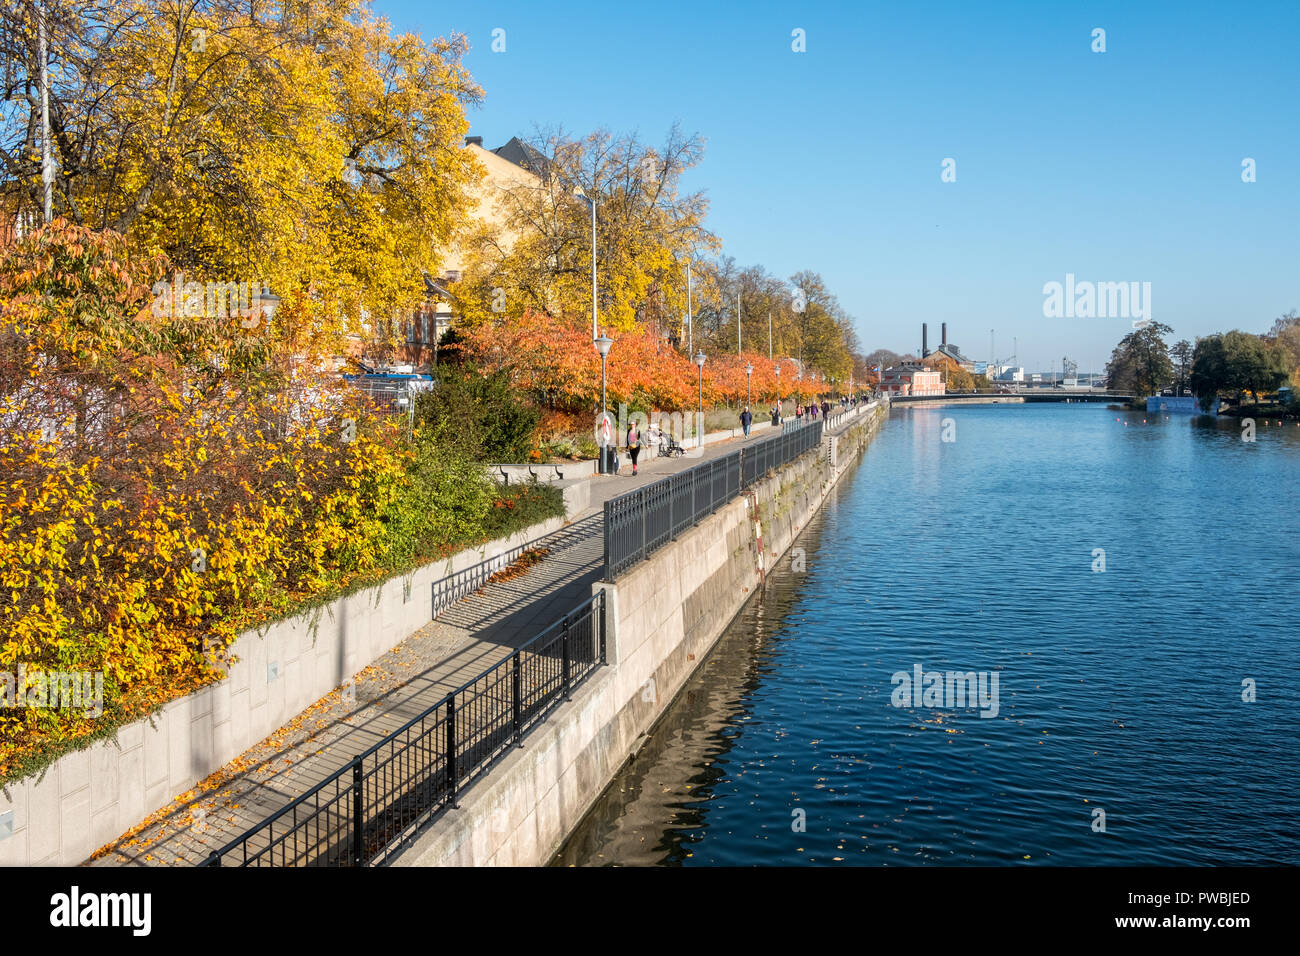 Norrköping waterfront Saltängen and Motala stream during a warm and sunny autumn day. Norrkoping is a historic industrial town in Sweden. Stock Photo